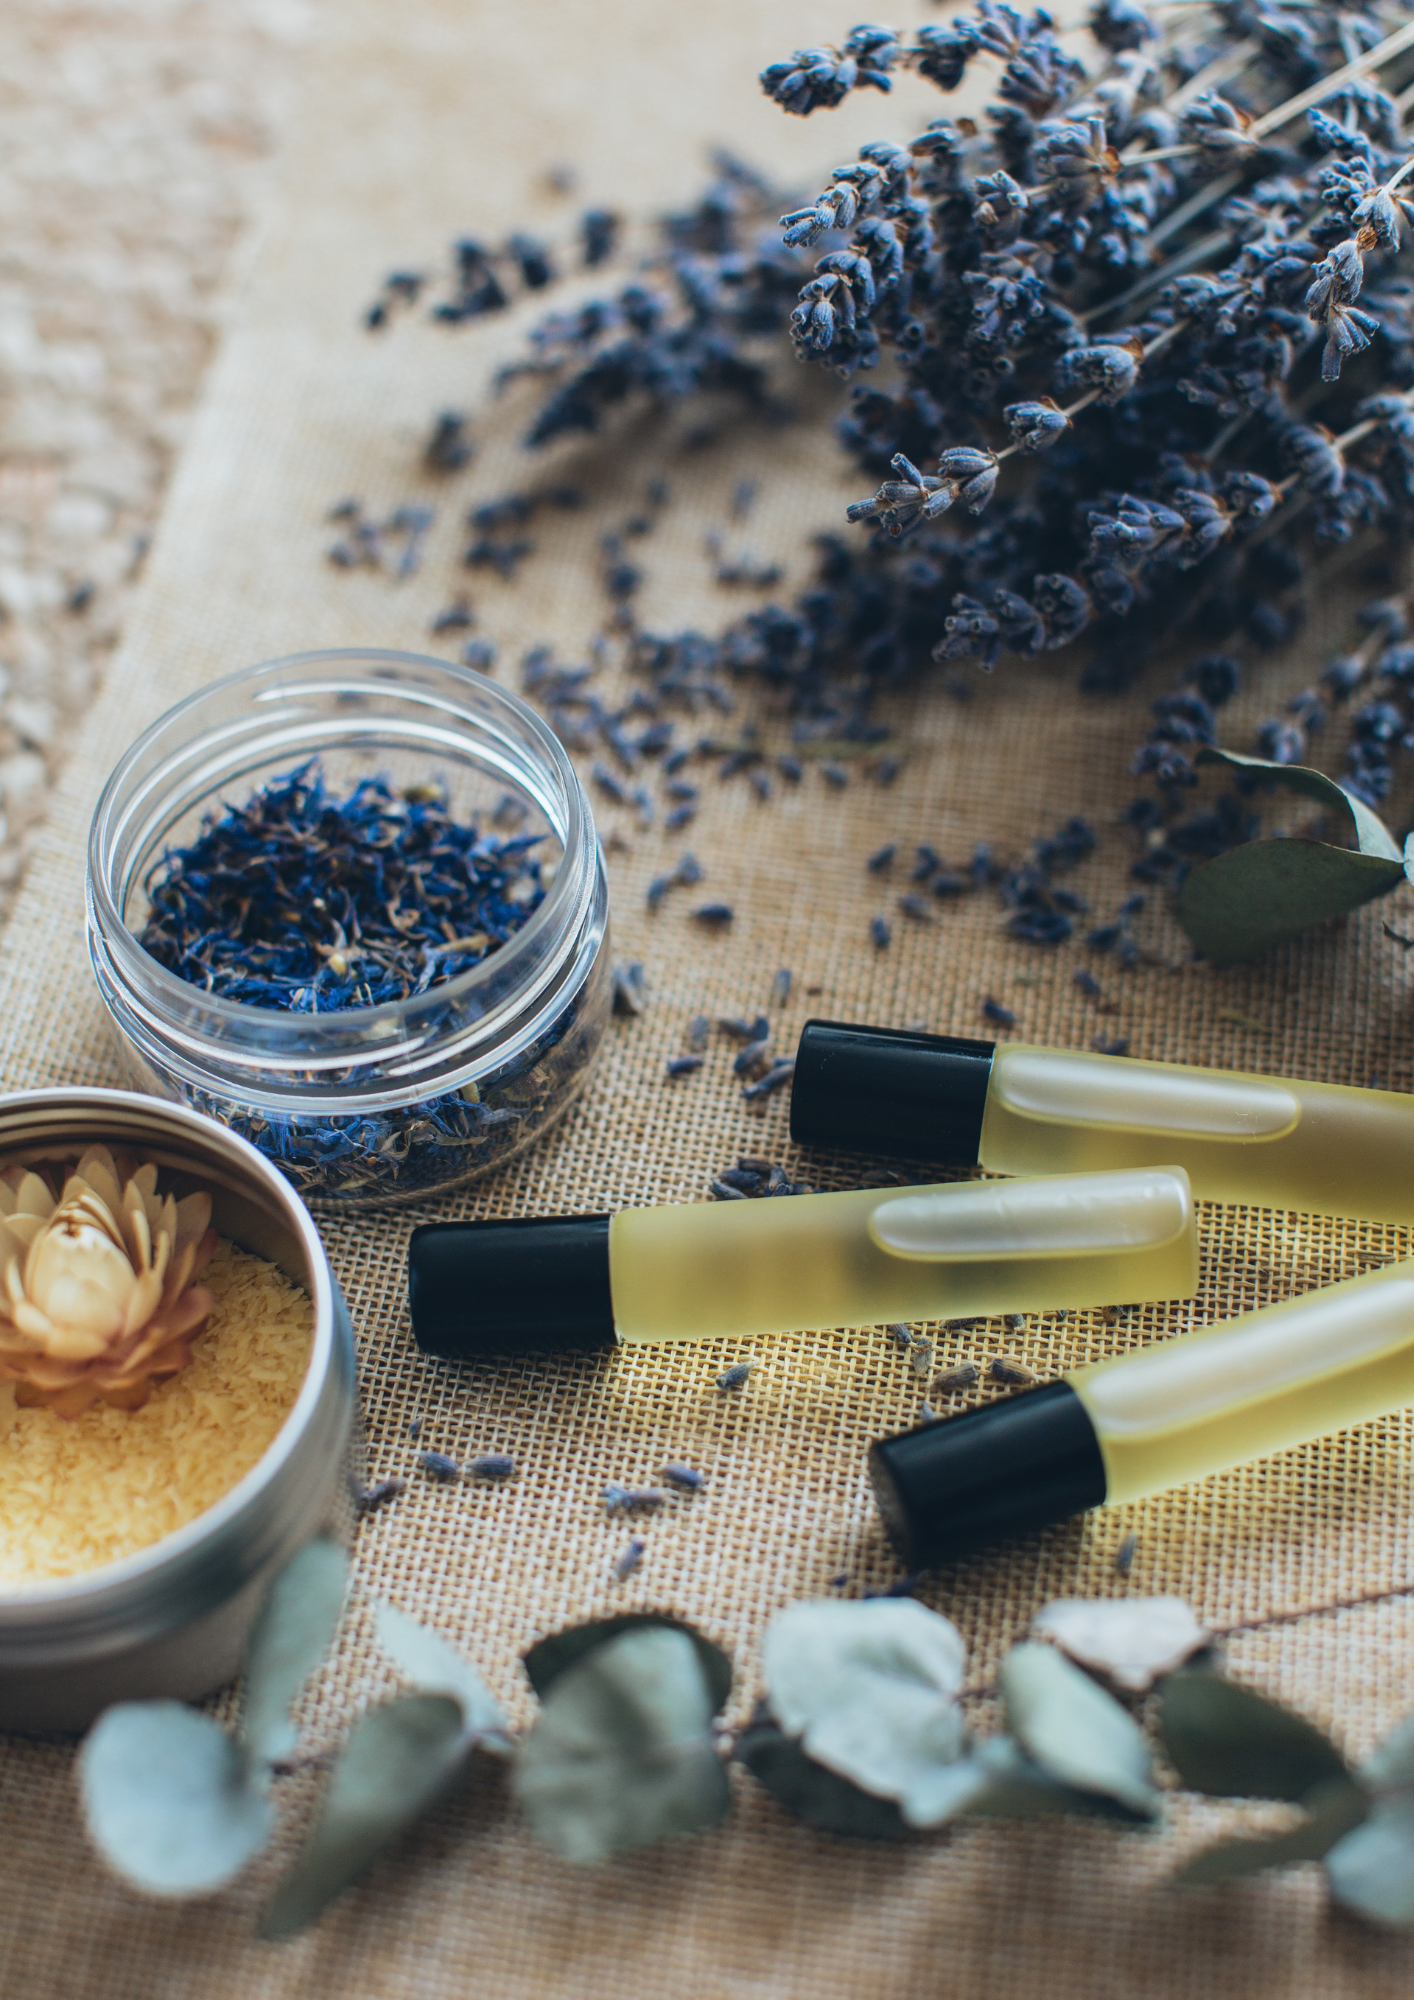 The Relationship between Aromatherapy and Mental Wellbeing A Narrative Review